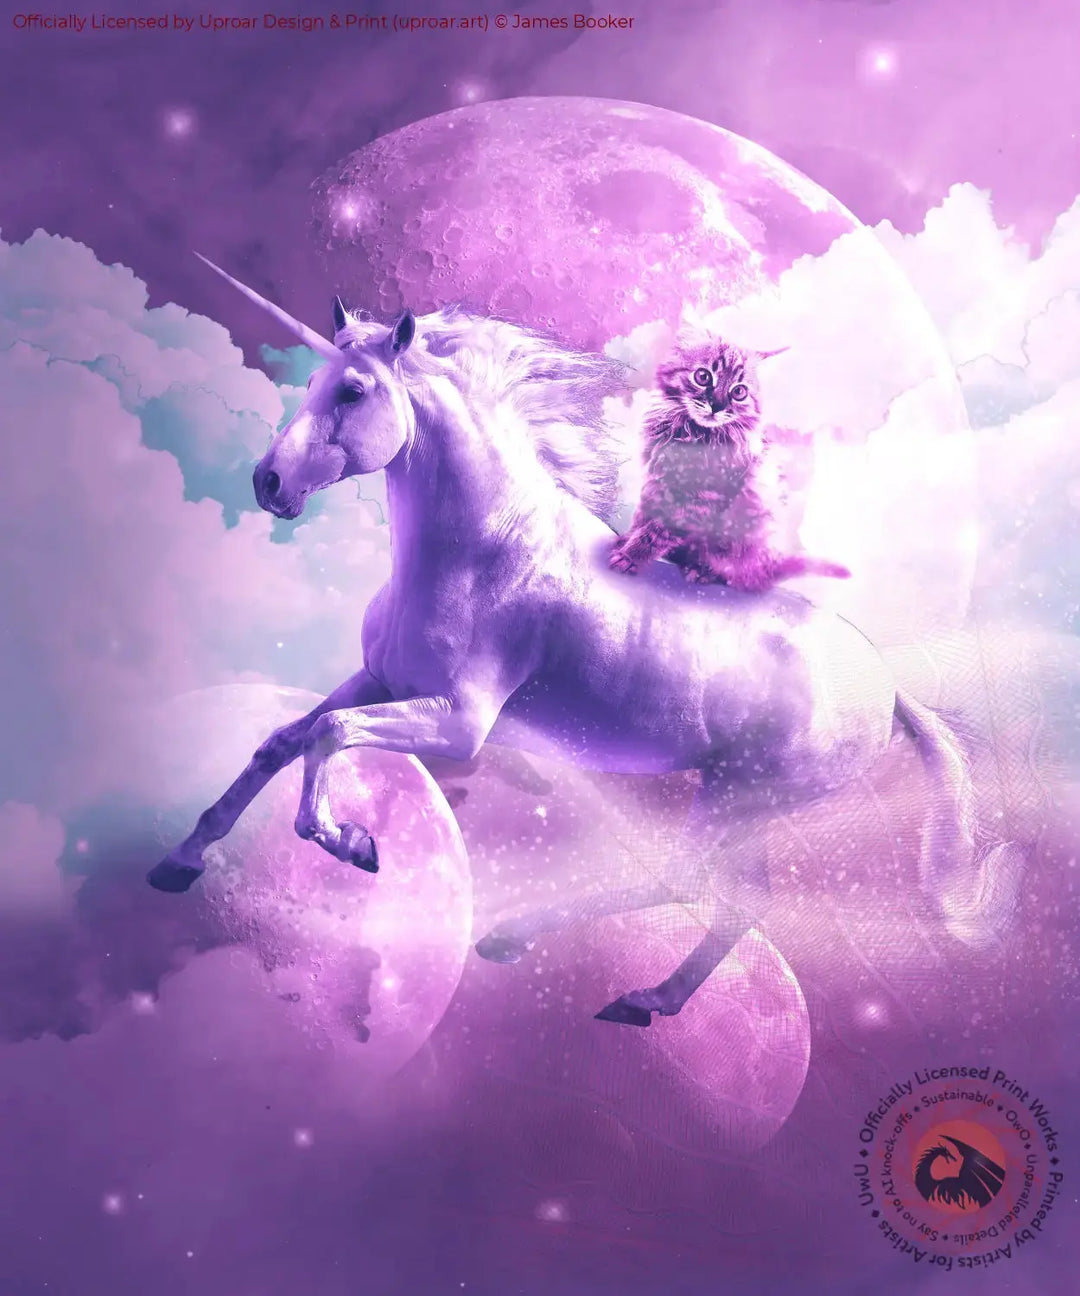 Kitty Cat Riding On Flying Space Galaxy Unicorn Posters Prints & Visual Artwork